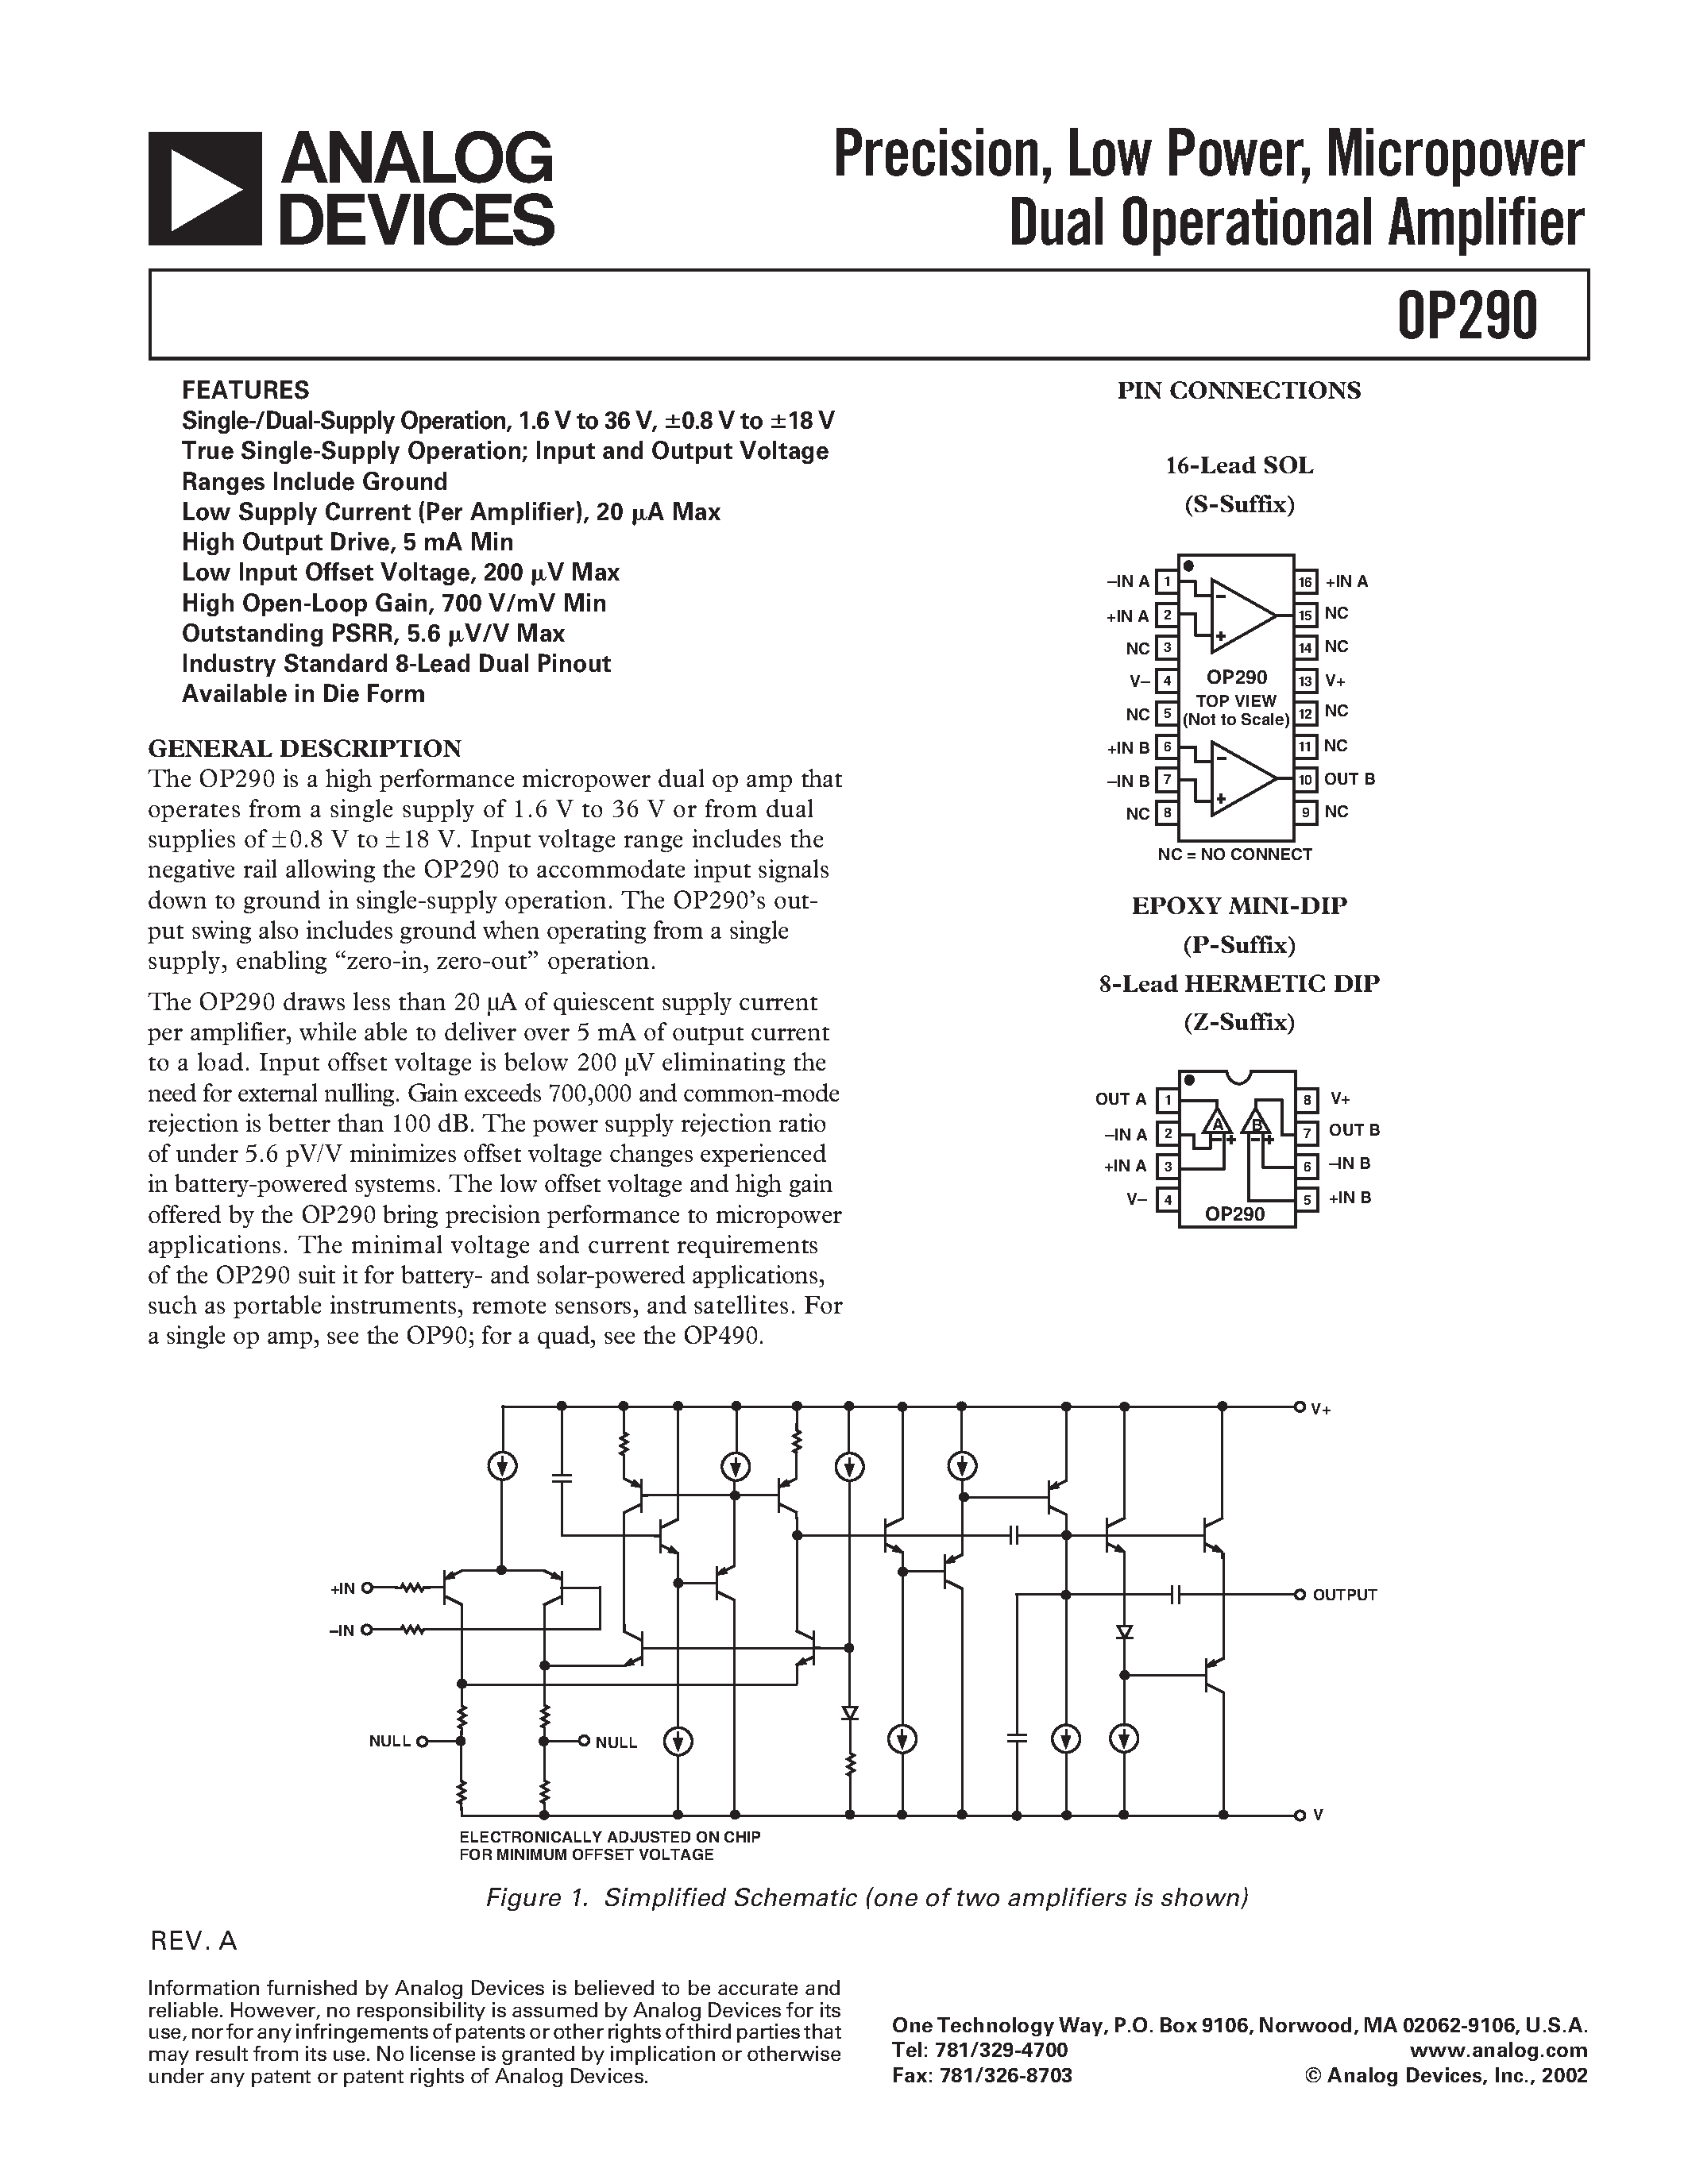 Datasheet OP290 - Precision / Low Power / Micropower Dual Operational Amplifier page 1